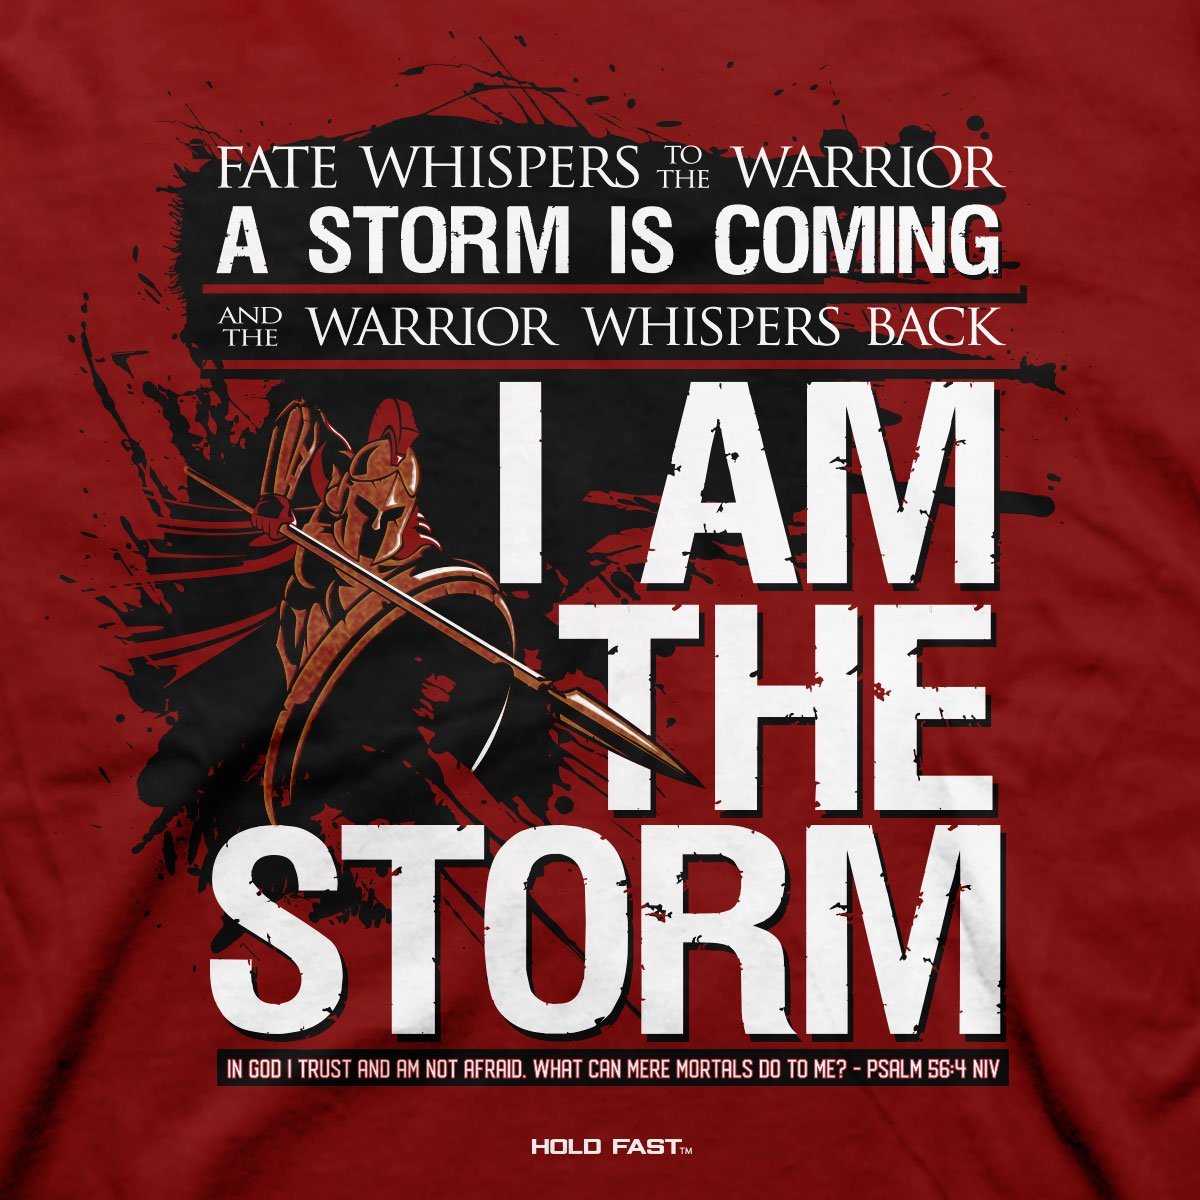 HOLD FAST Christian T-Shirt I Am The Storm Psalm 56:4 By KERUSSO